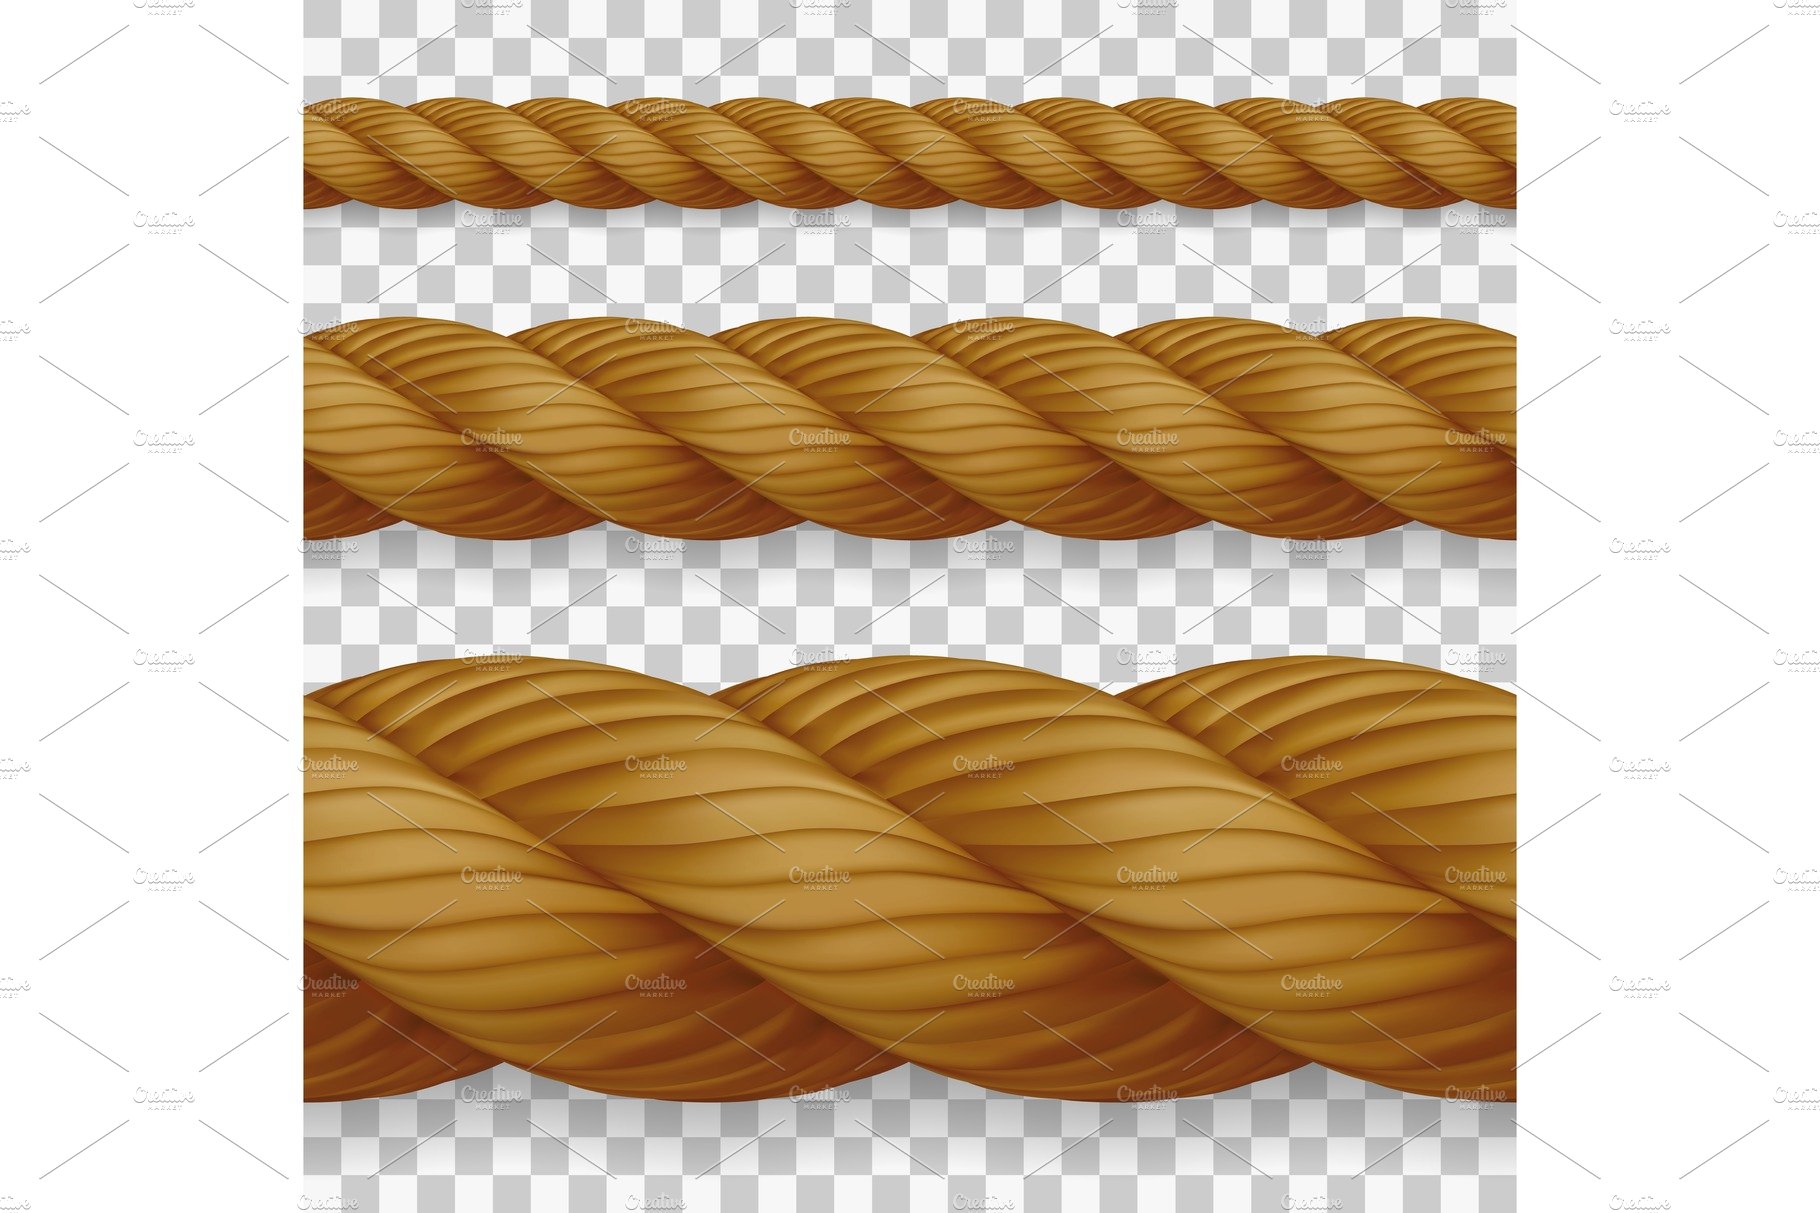 Set of seamless realistic hemp ropes cover image.